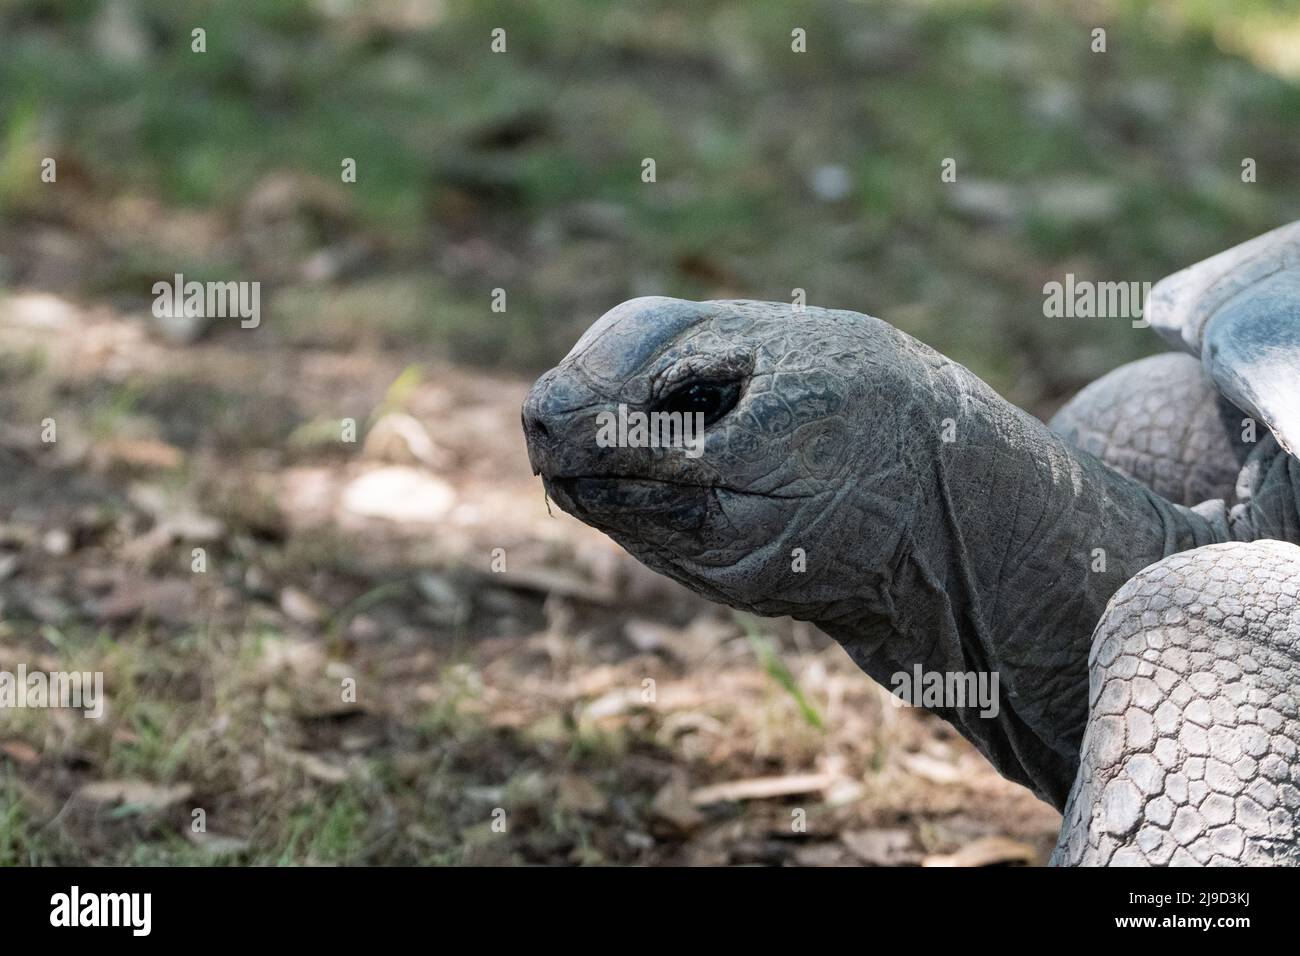 Closeup profile of the head of a Galapagos Tortoise as it slowly walks across a meadow. Stock Photo